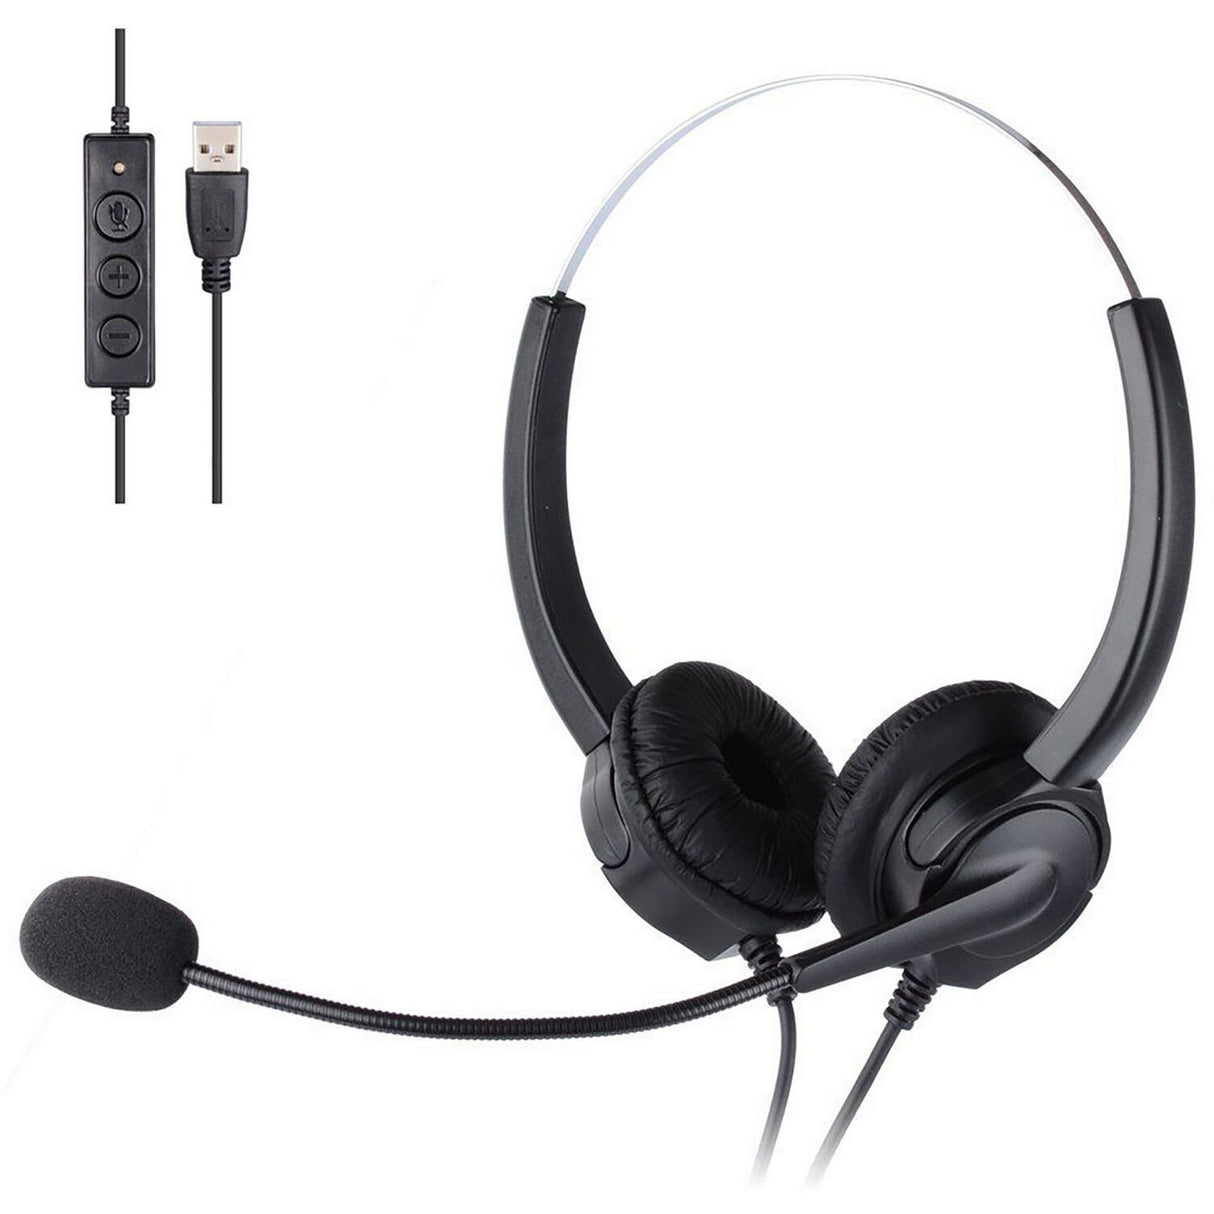 VDO360 VDOUHS USB and 3.5mm Headset with Noise Cancelling Microphone